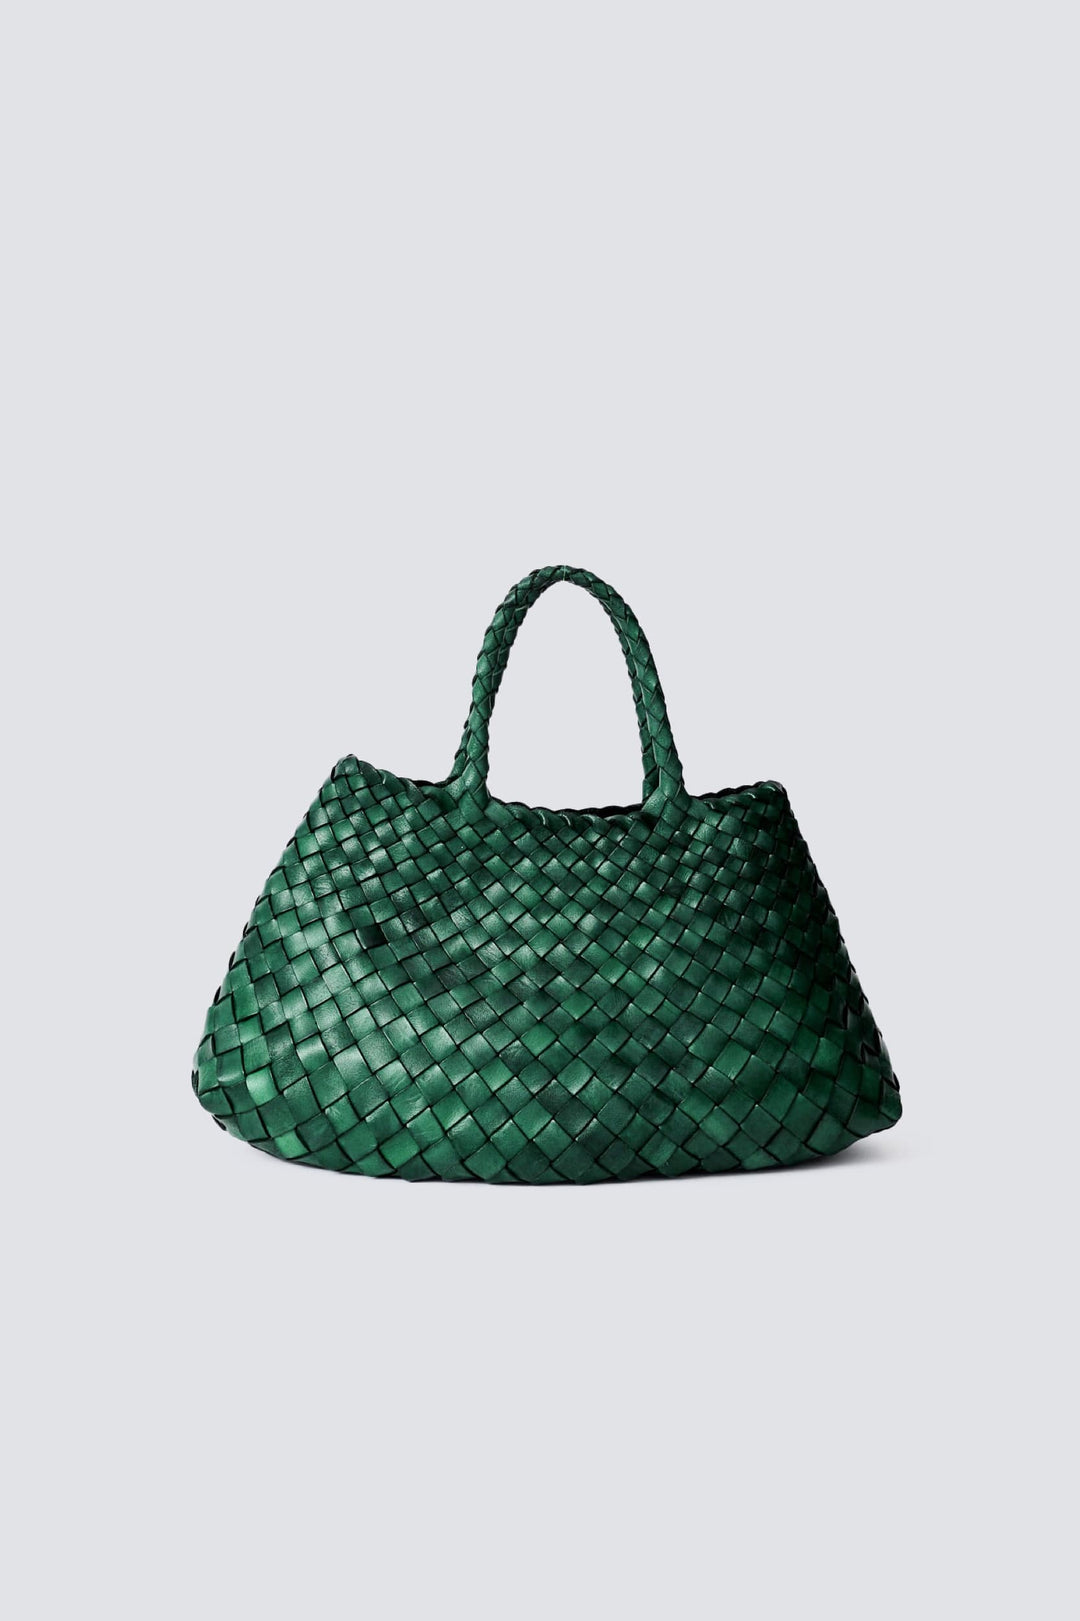 Dragon Diffusion woven leather bag handmade - Santa Croce Small Forest Green